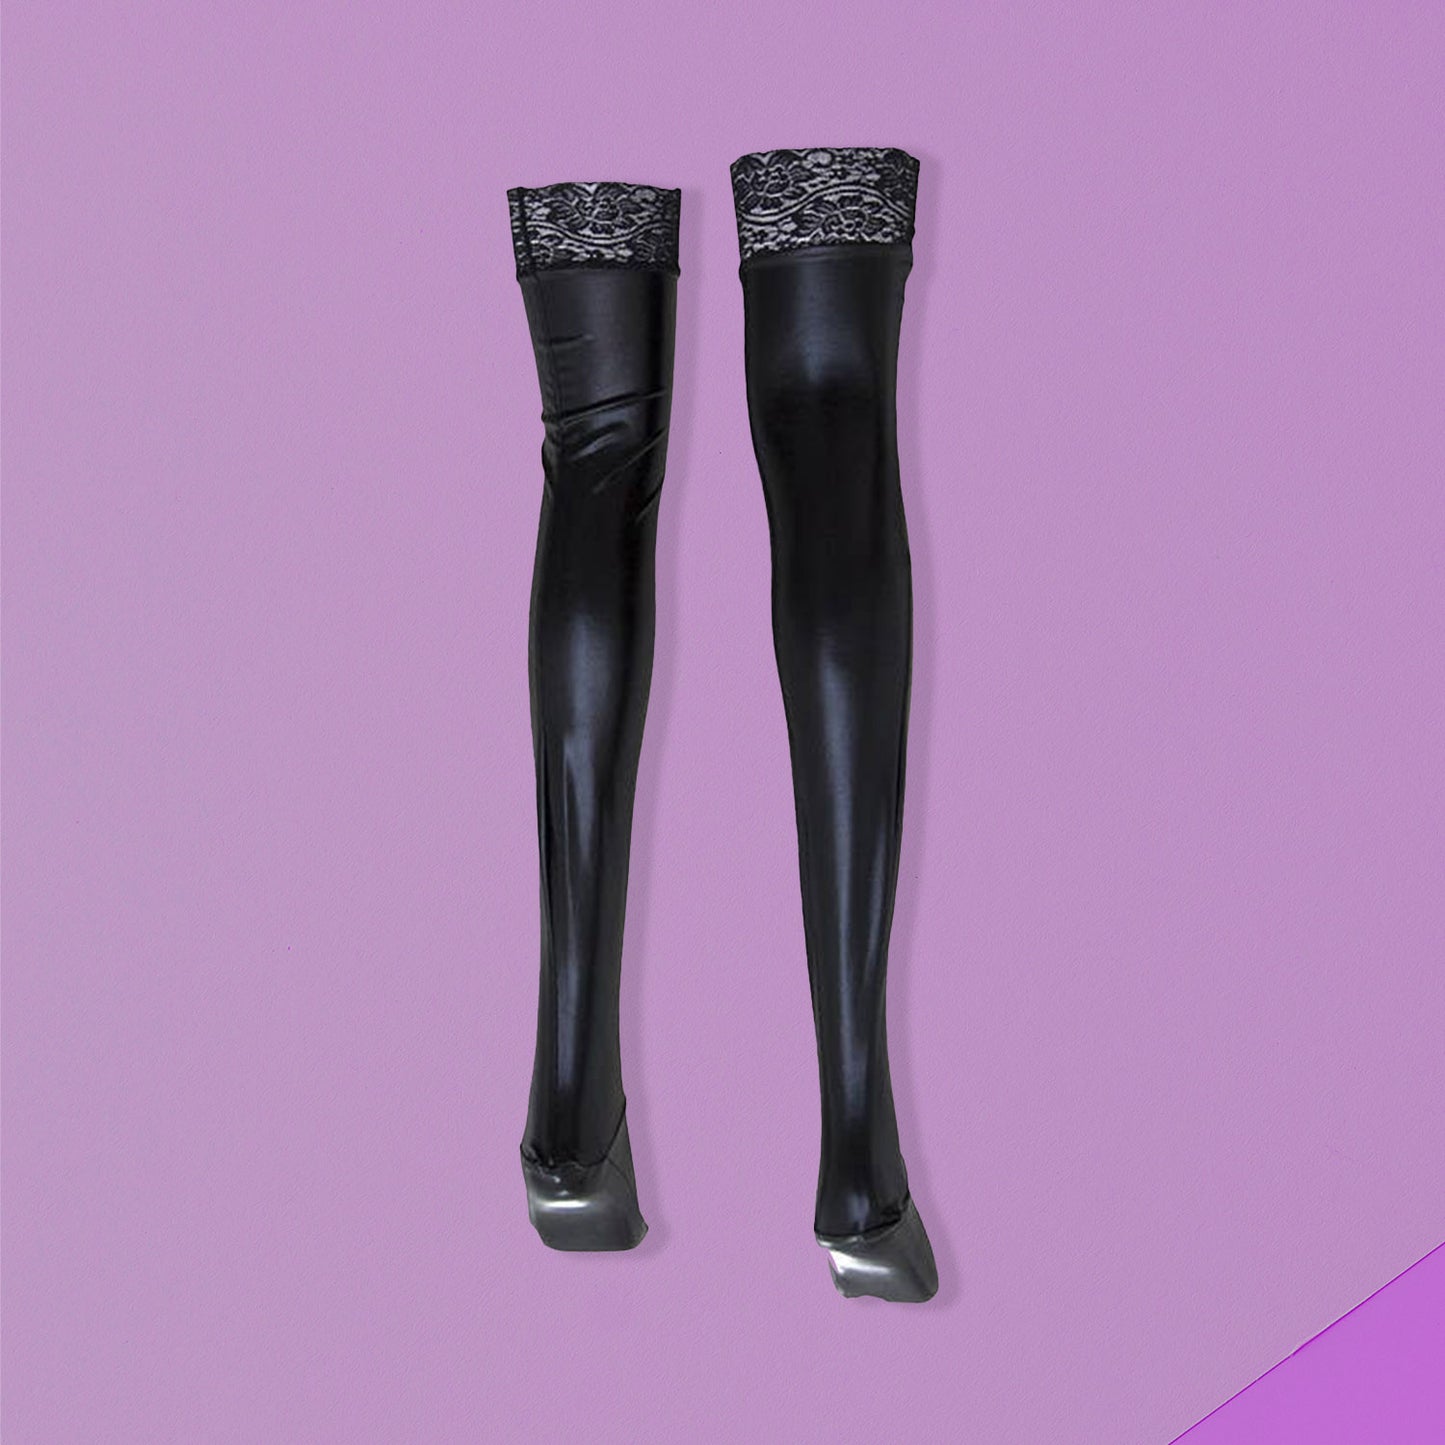 The Horny Company - Black Dragon Faux Leather Stockings With Anti-slip Lace Trim